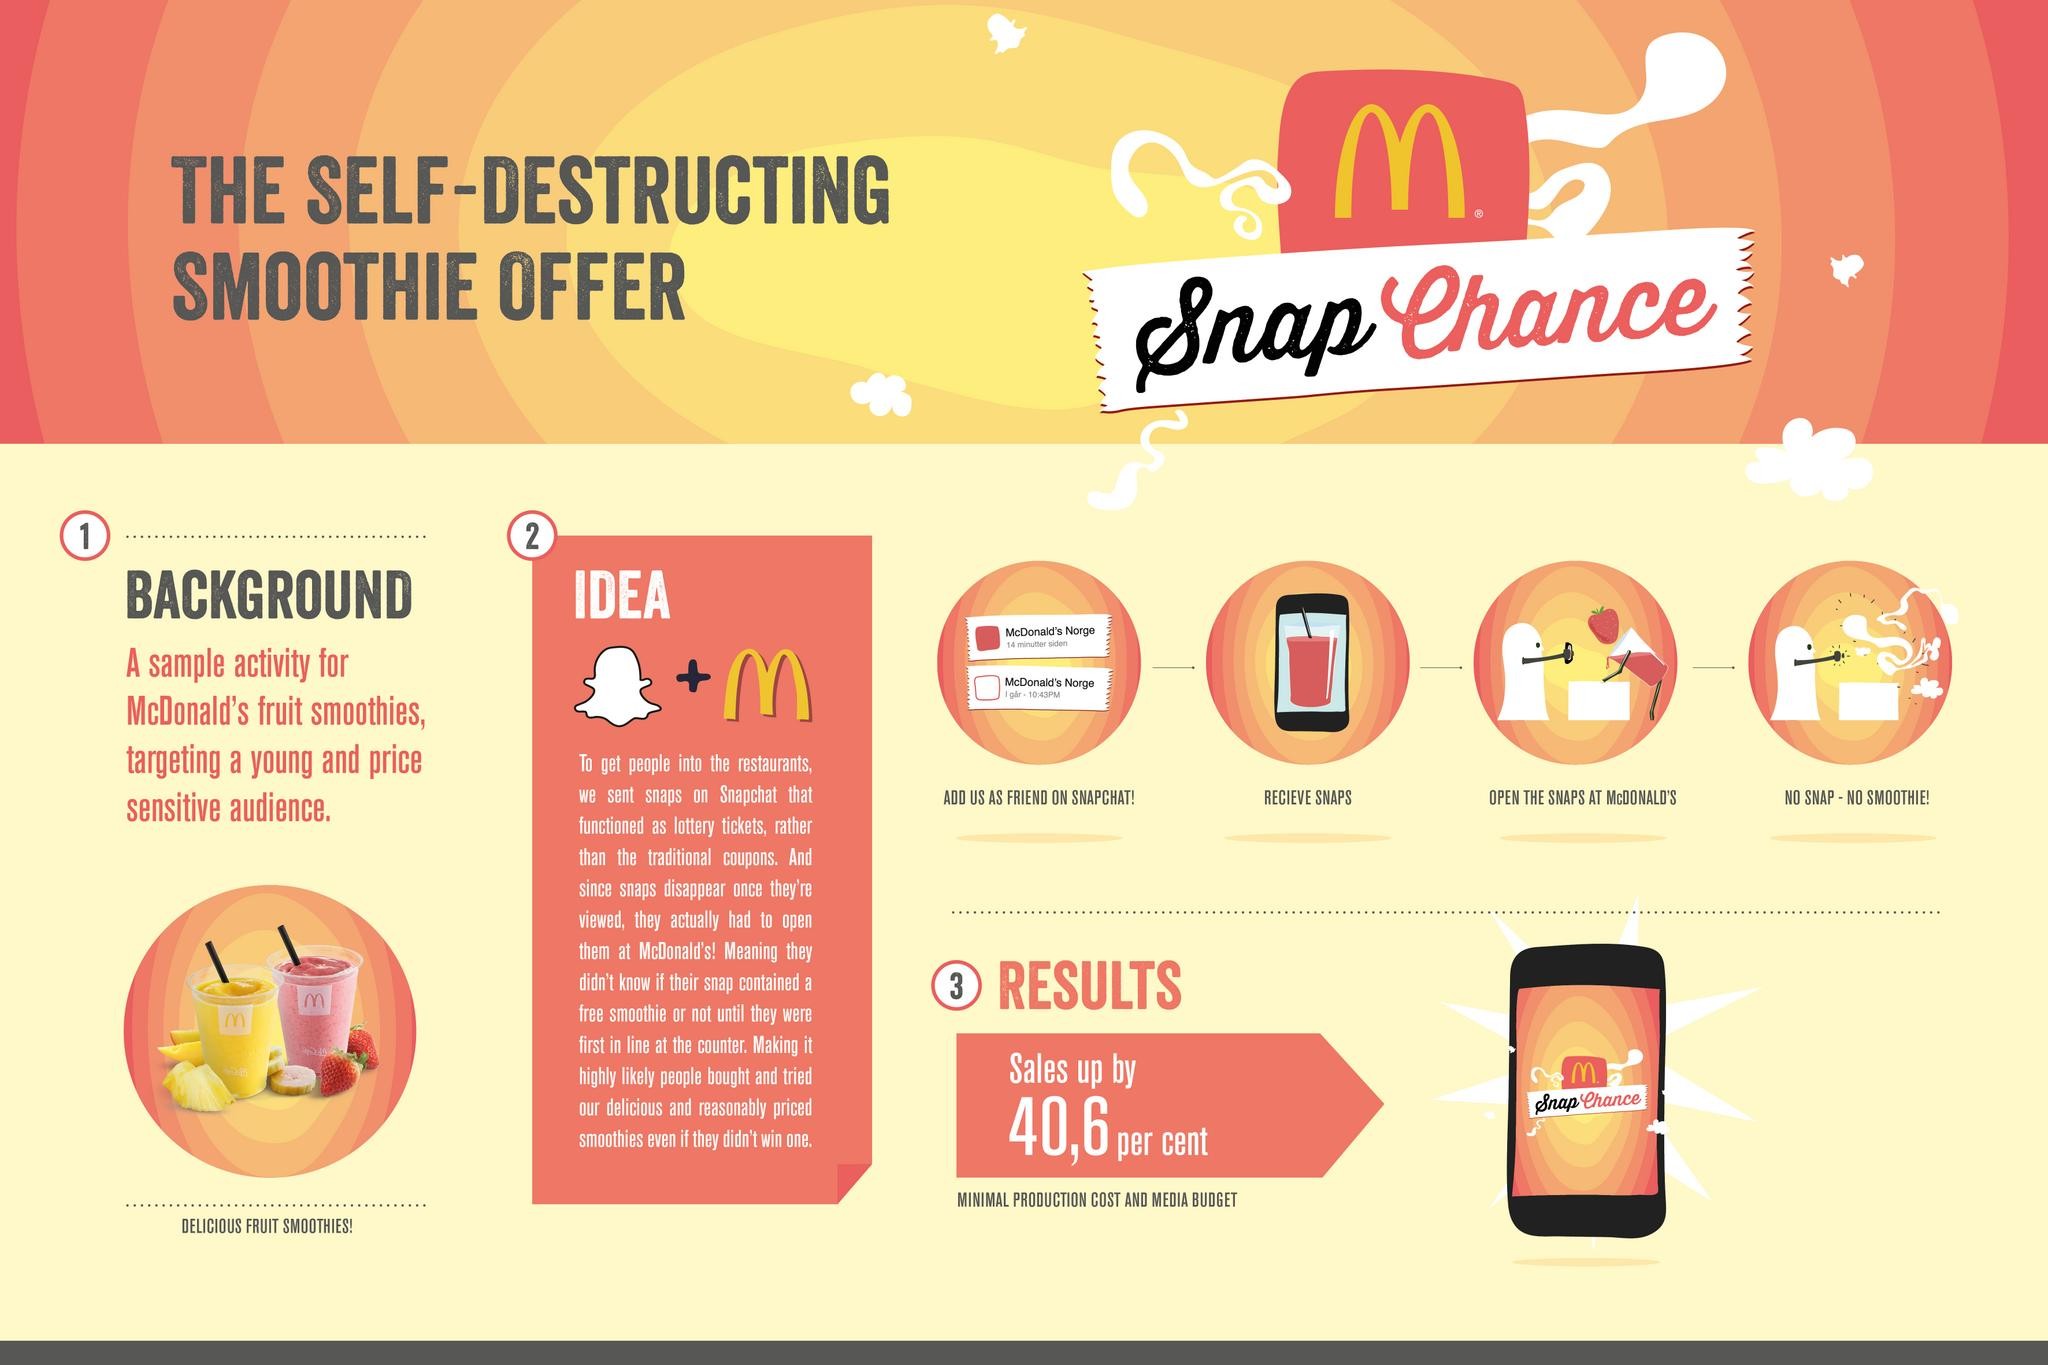 SNAPCHANCE - THE SELF-DESTRUCTING SMOOTHIE OFFER